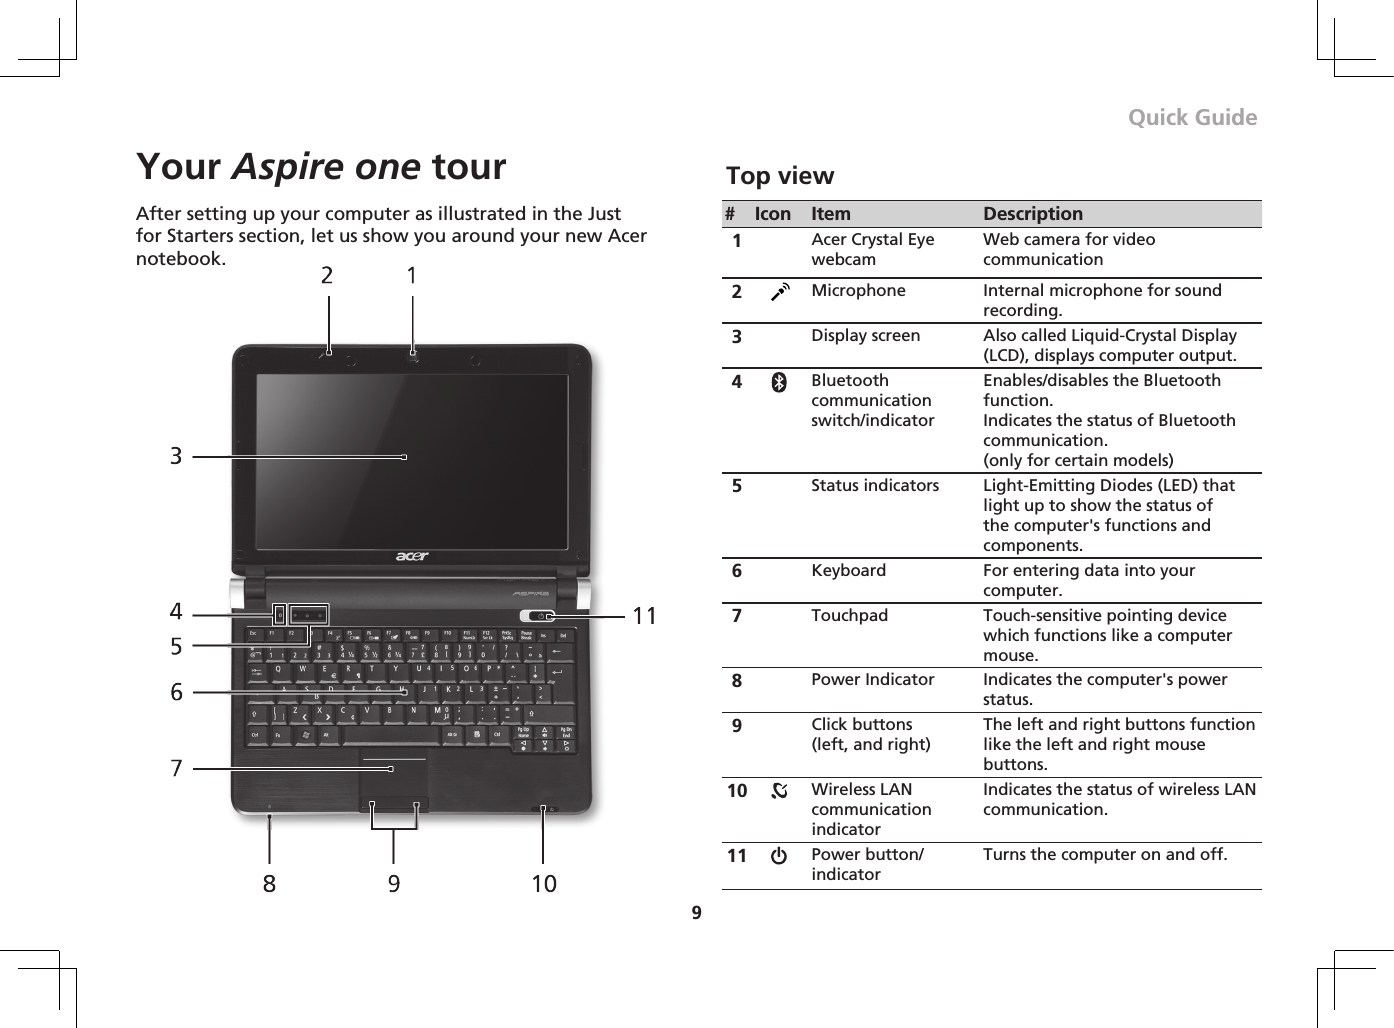 Quick Guide9Your Aspire one tourAfter setting up your computer as illustrated in the Just for Starters section, let us show you around your new Acer notebook.Top view# Icon Item Description1Acer Crystal Eye webcamWeb camera for video communication 2Microphone Internal microphone for sound recording.3Display screen Also called Liquid-Crystal Display (LCD), displays computer output.4Bluetoothcommunication switch/indicatorEnables/disablestheBluetoothfunction. IndicatesthestatusofBluetoothcommunication. (only for certain models)5Status indicators Light-Emitting Diodes (LED) that light up to show the status of the computer&apos;s functions and components. 6Keyboard For entering data into your computer.7Touchpad Touch-sensitive pointing device which functions like a computer mouse.8Power Indicator Indicates the computer&apos;s power status.    9Click buttons  (left, and right)The left and right buttons function like the left and right mouse buttons. 10 Wireless LAN communication indicatorIndicates the status of wireless LAN communication.11 Power button/indicatorTurns the computer on and off.